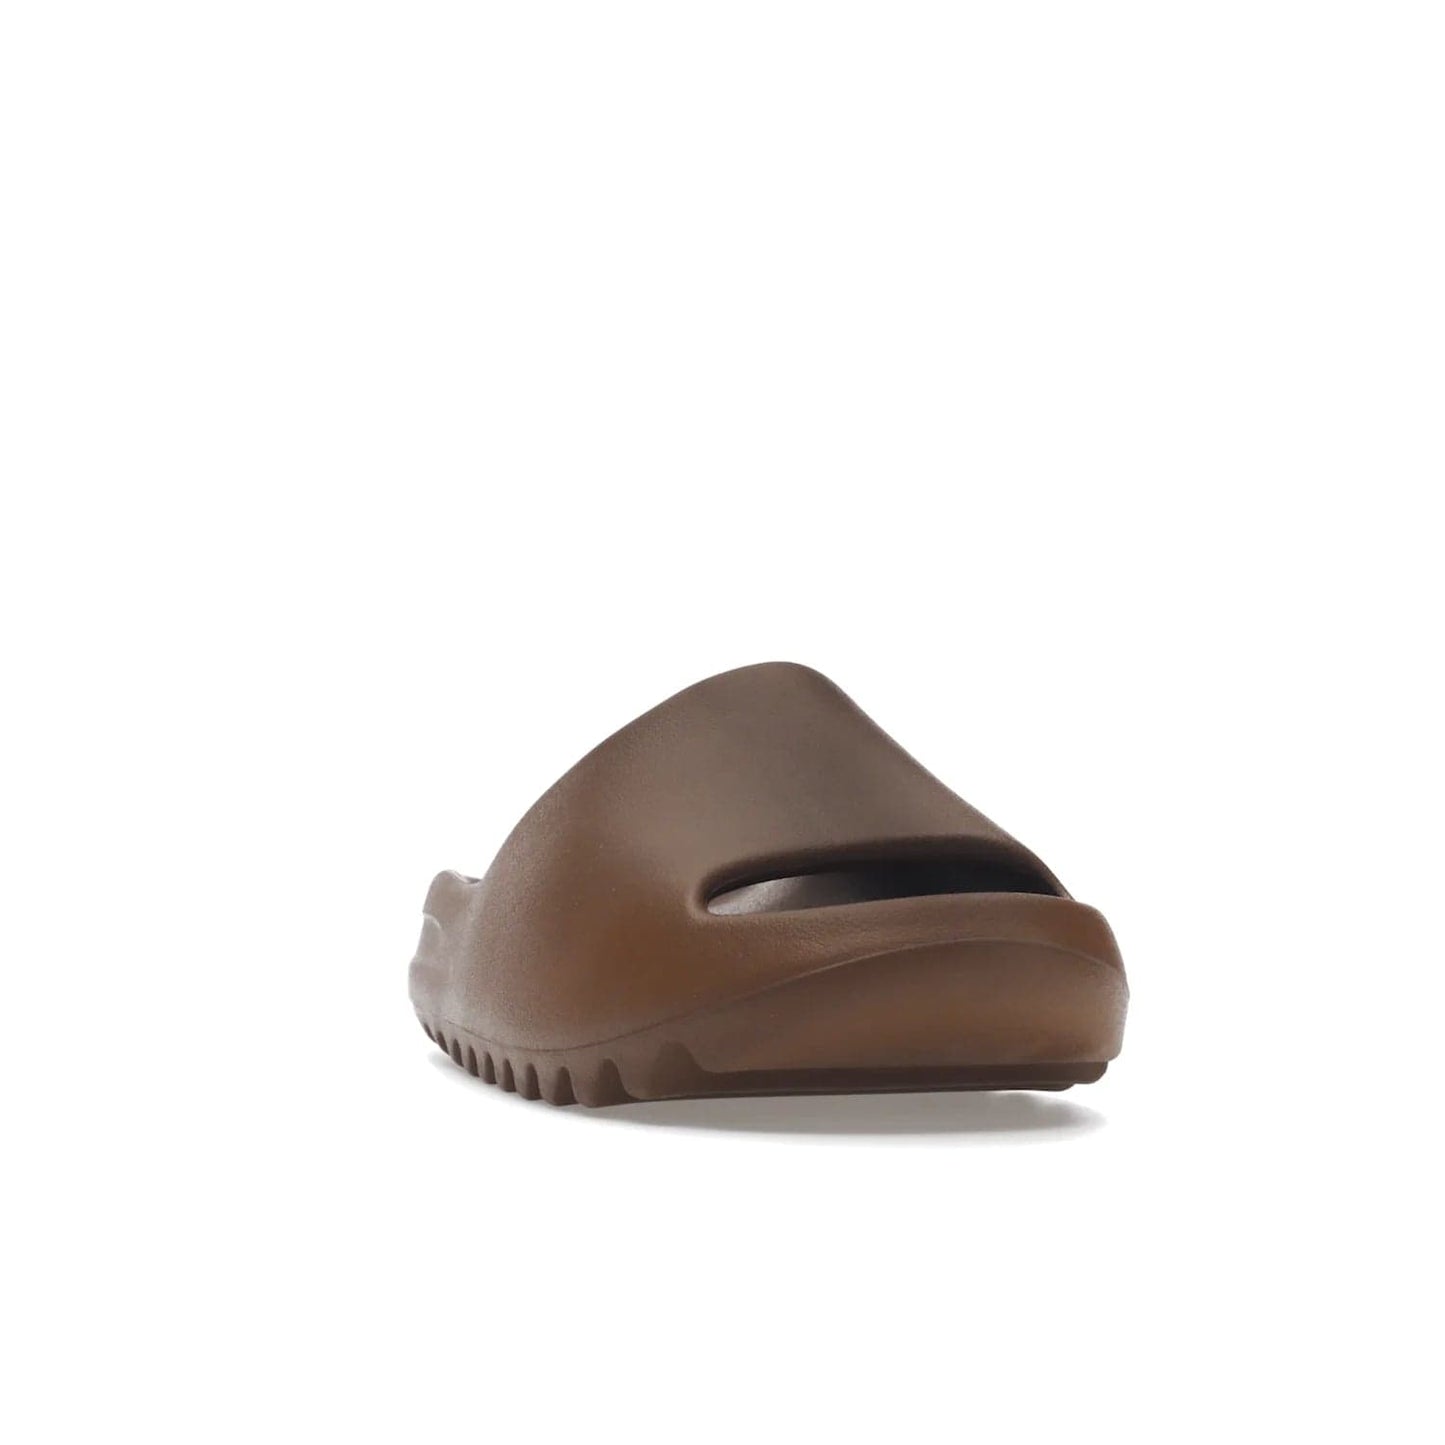 adidas Yeezy Slide Flax - Image 8 - Only at www.BallersClubKickz.com - Score the perfect casual look with the adidas Yeezy Slide Flax. Made with lightweight injected EVA plus horizontal grooves underfoot for traction. Release on August 22, 2022. $70.